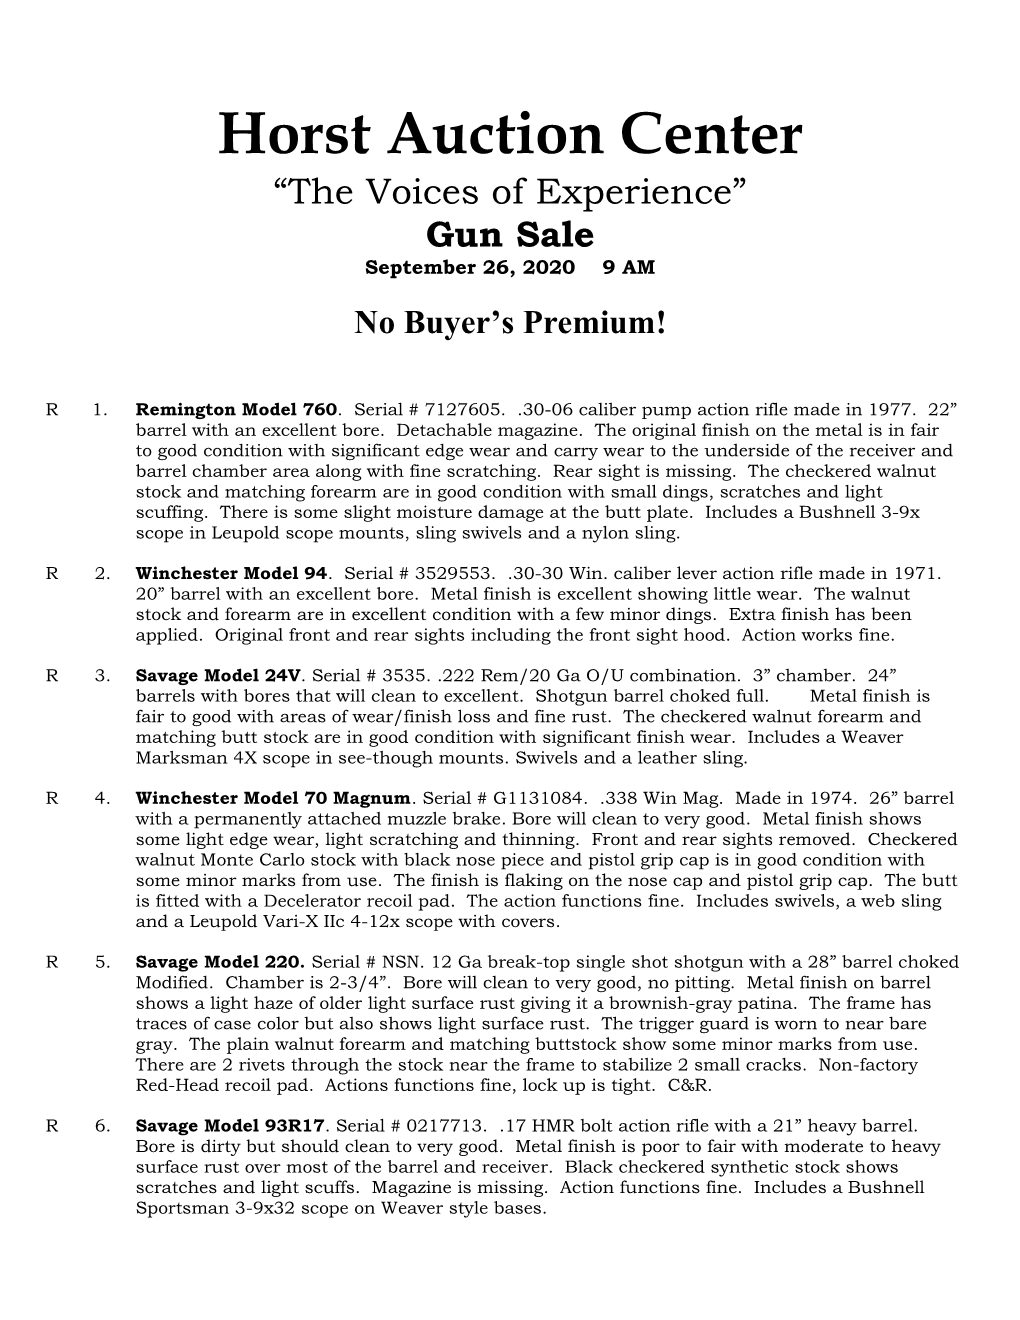 Horst Auction Center “The Voices of Experience” Gun Sale September 26, 2020 9 AM